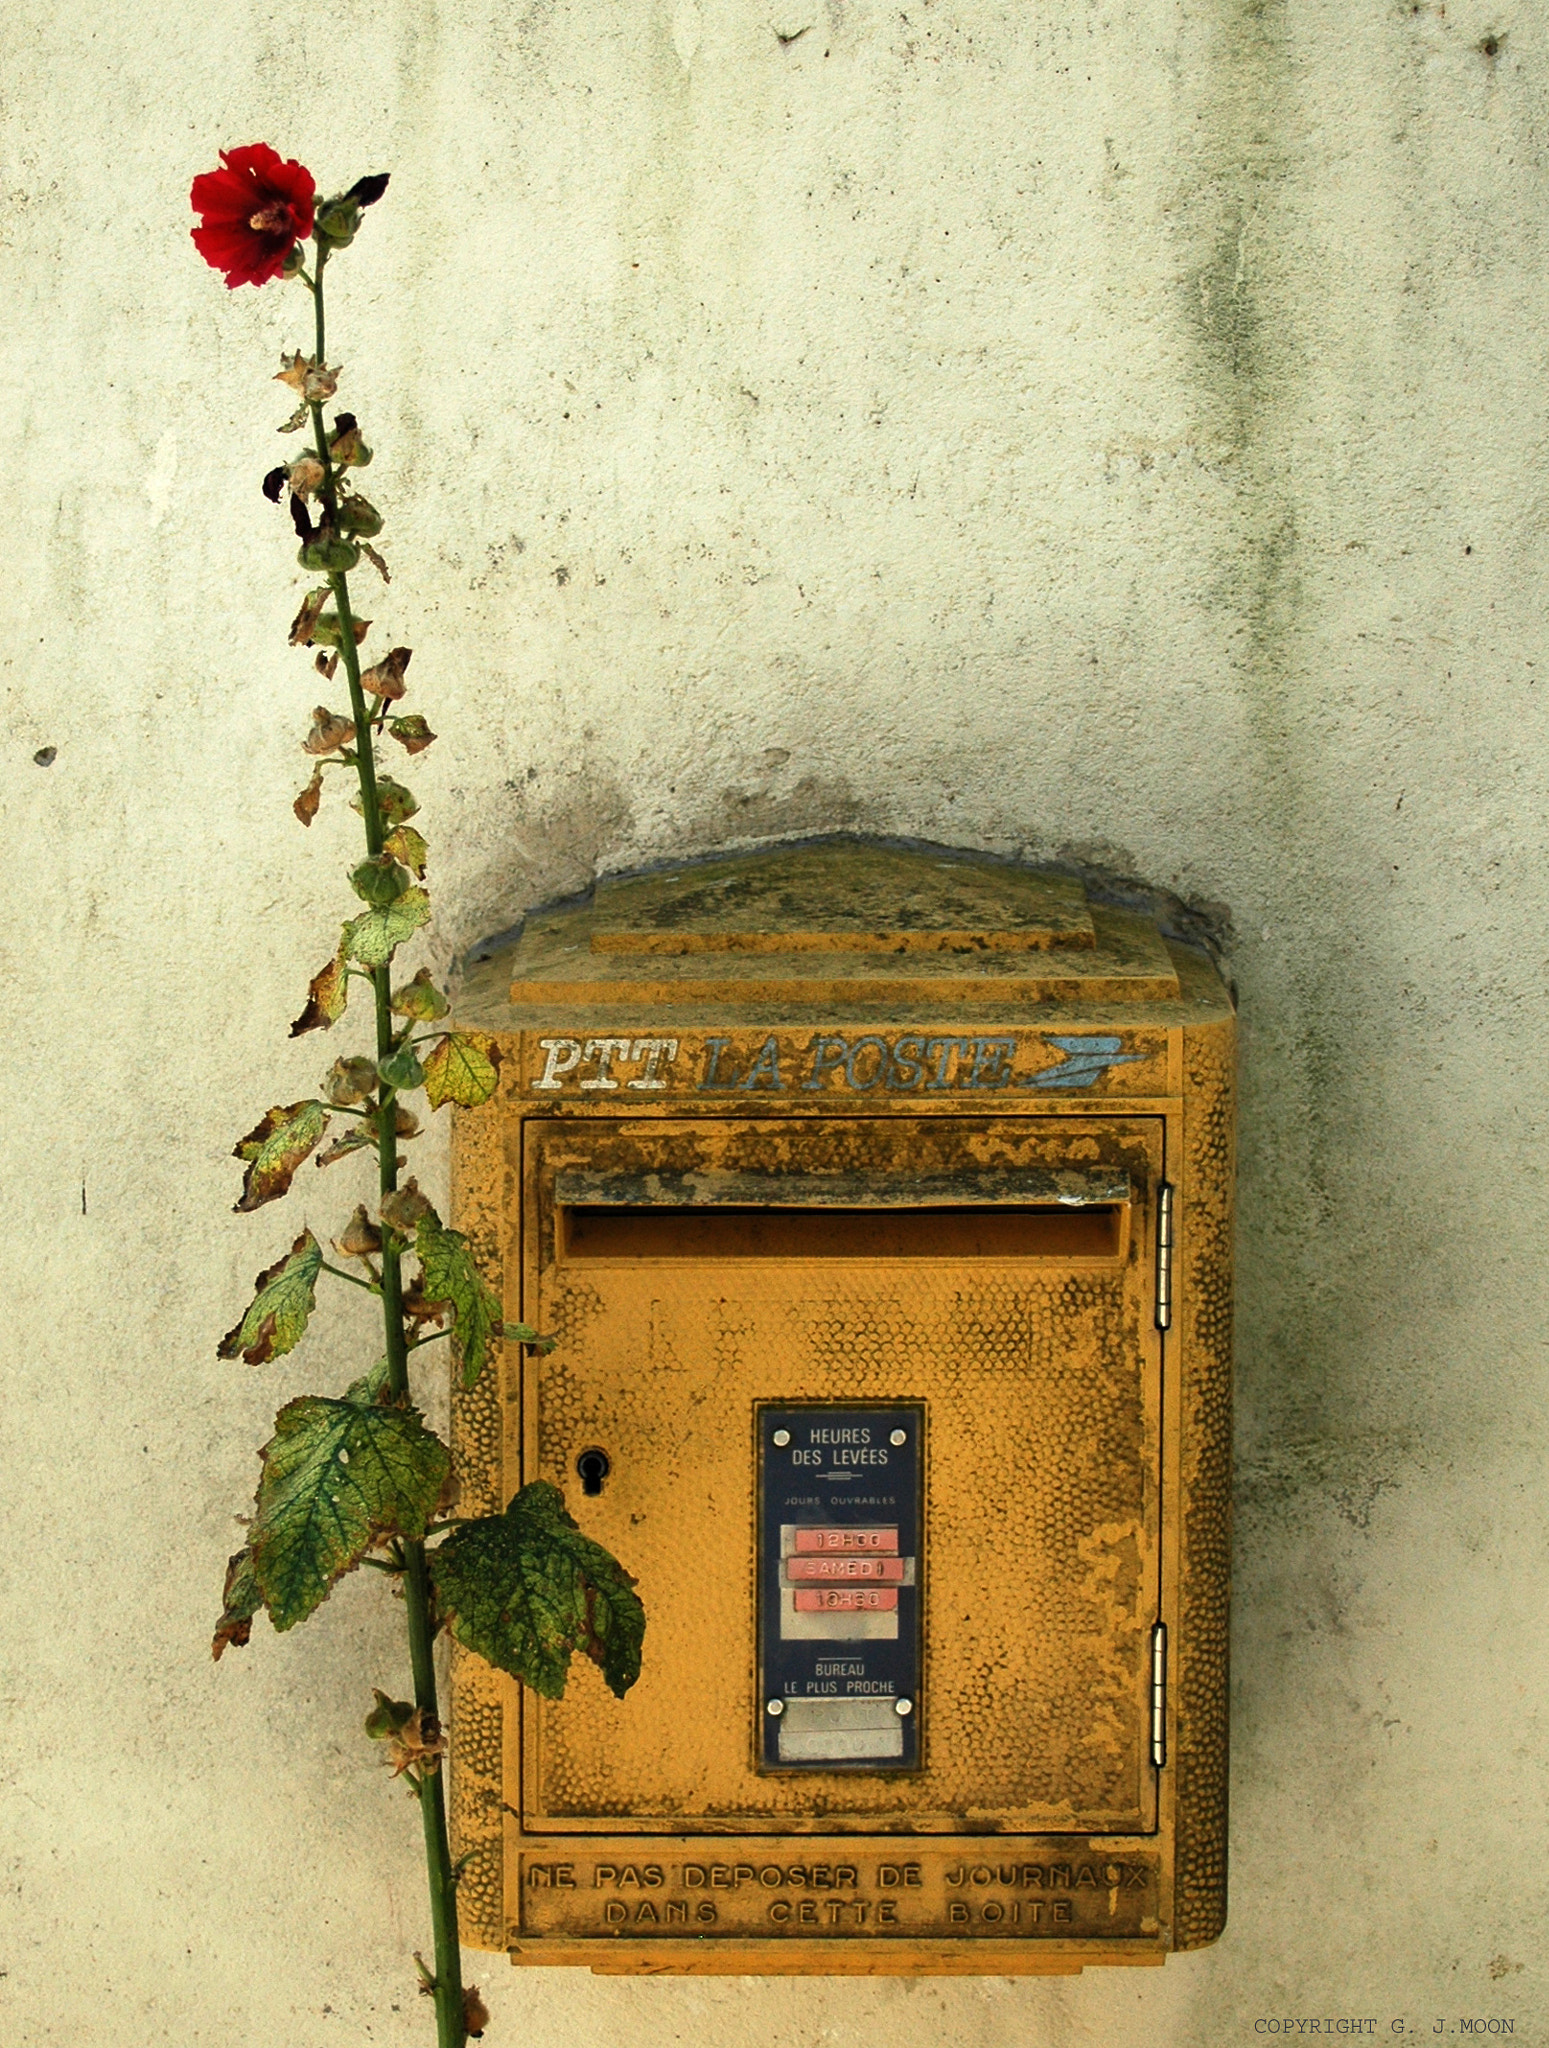 Nikon D70 + Sigma 18-50mm F3.5-5.6 DC sample photo. The flower and the mailbox photography